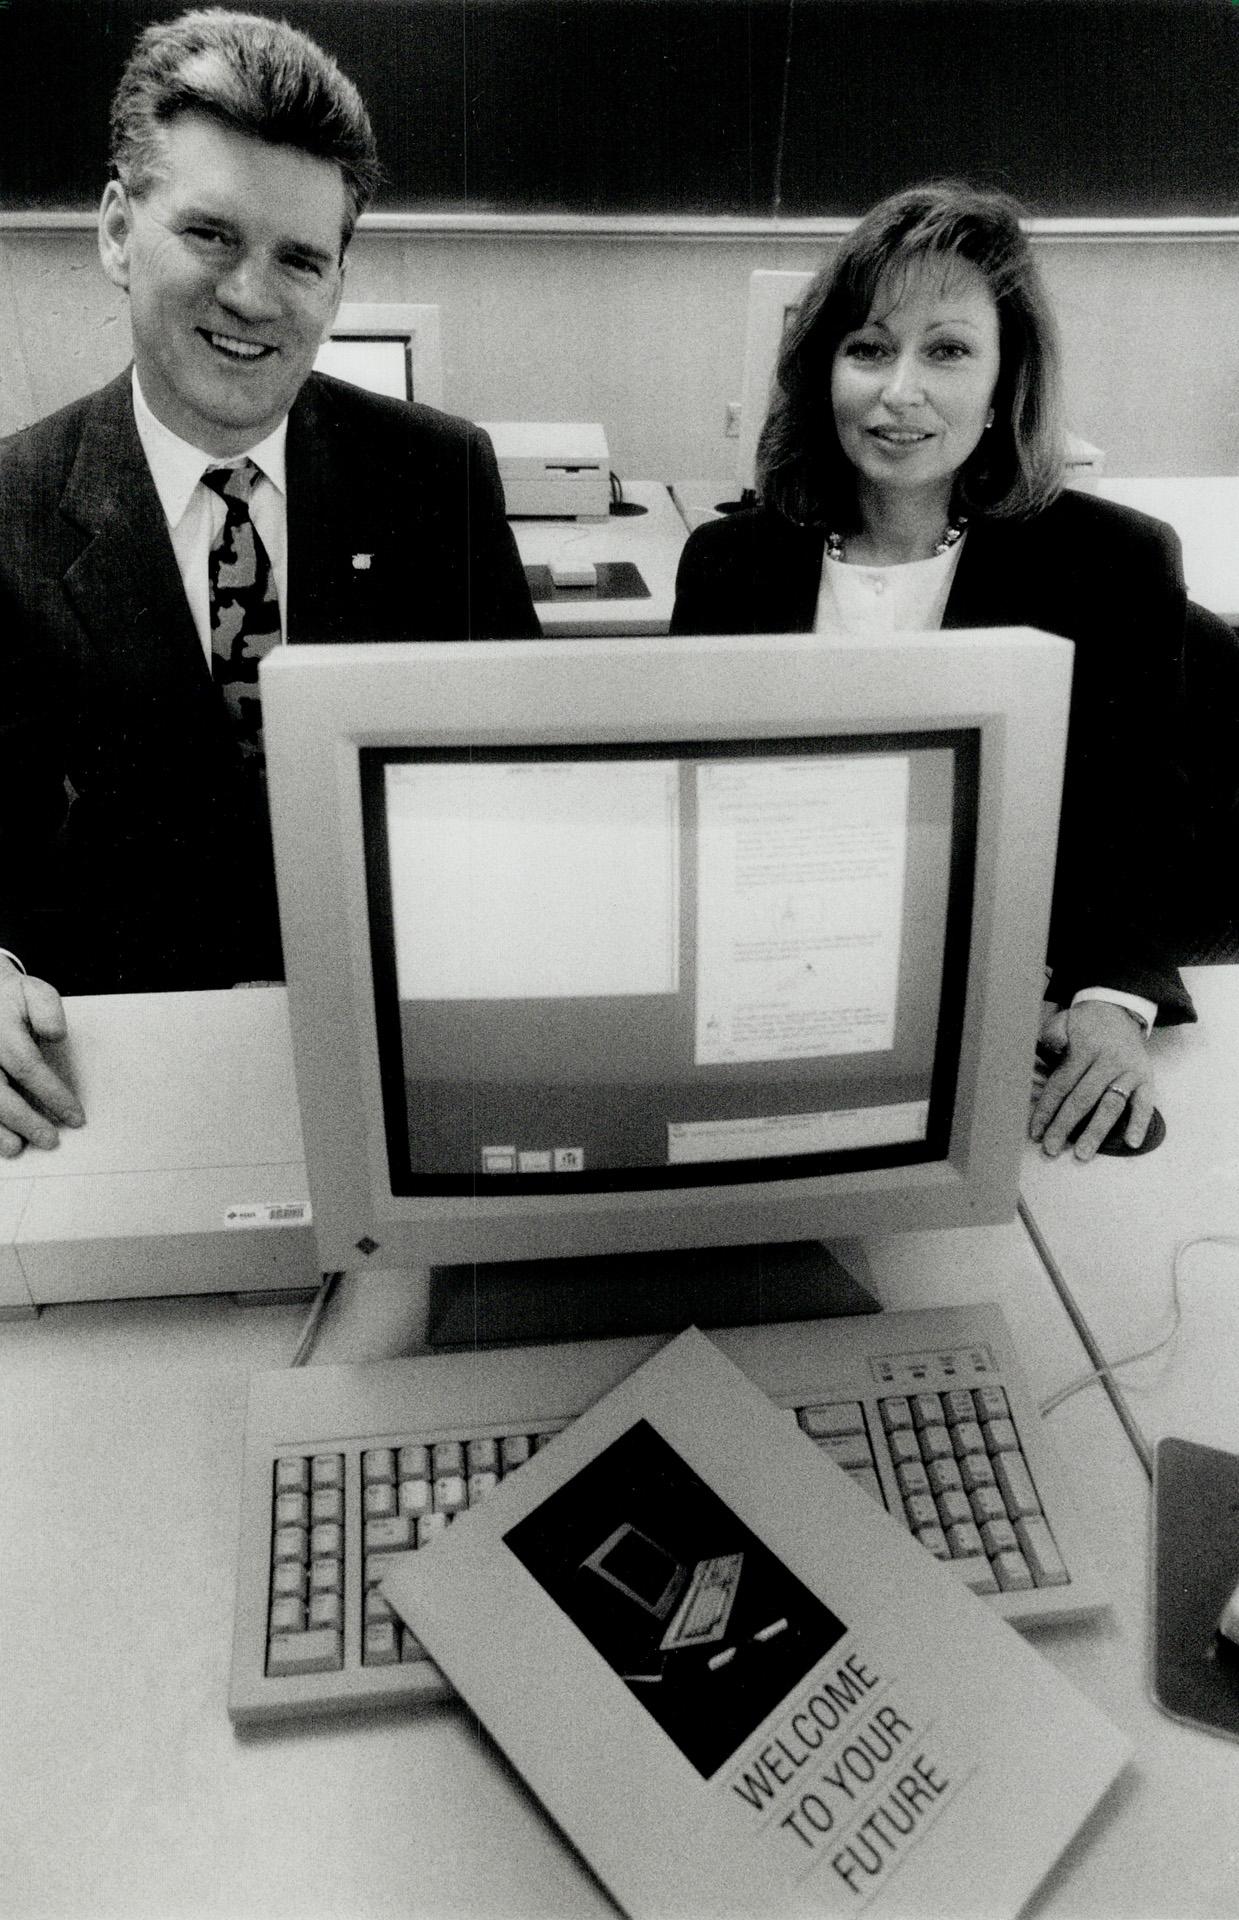 high-tech-teachers-doug-and-carol-morley-run-the-institute-for-computer-studies-in-north-york